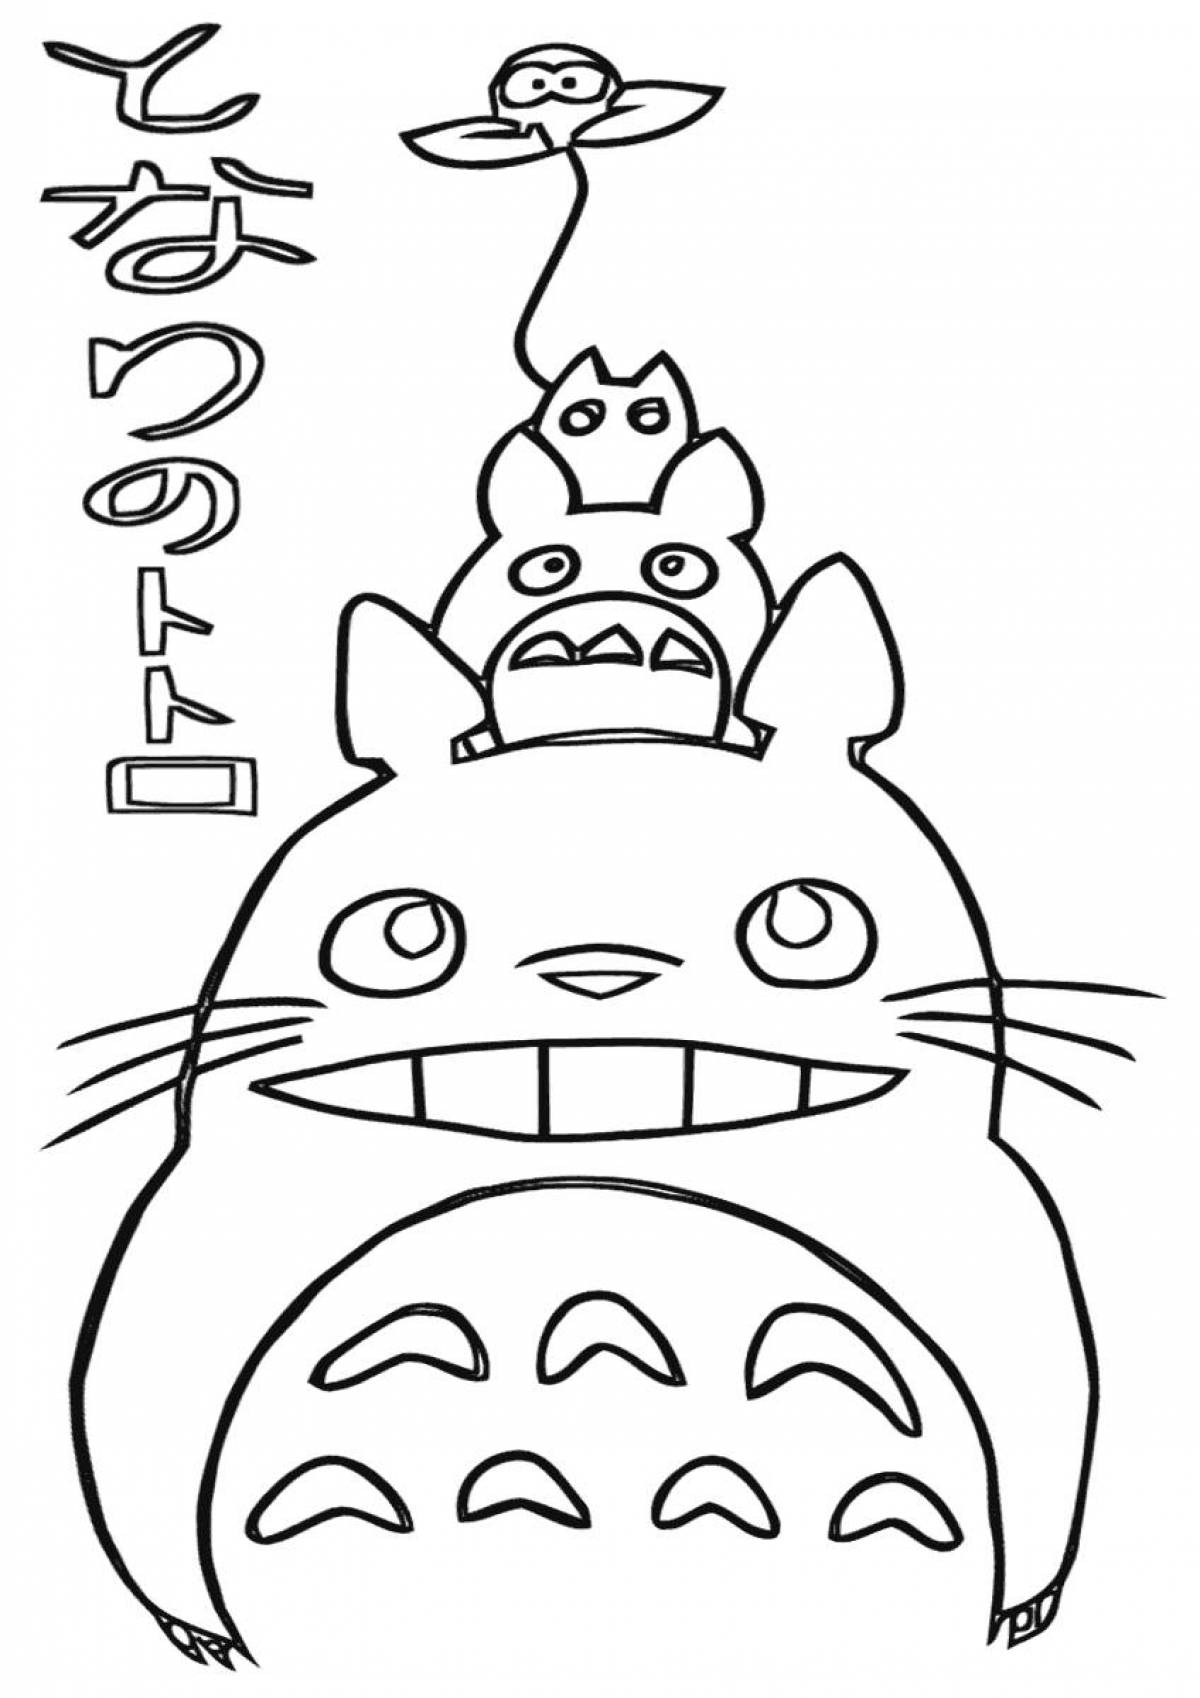 Charming totoro coloring book